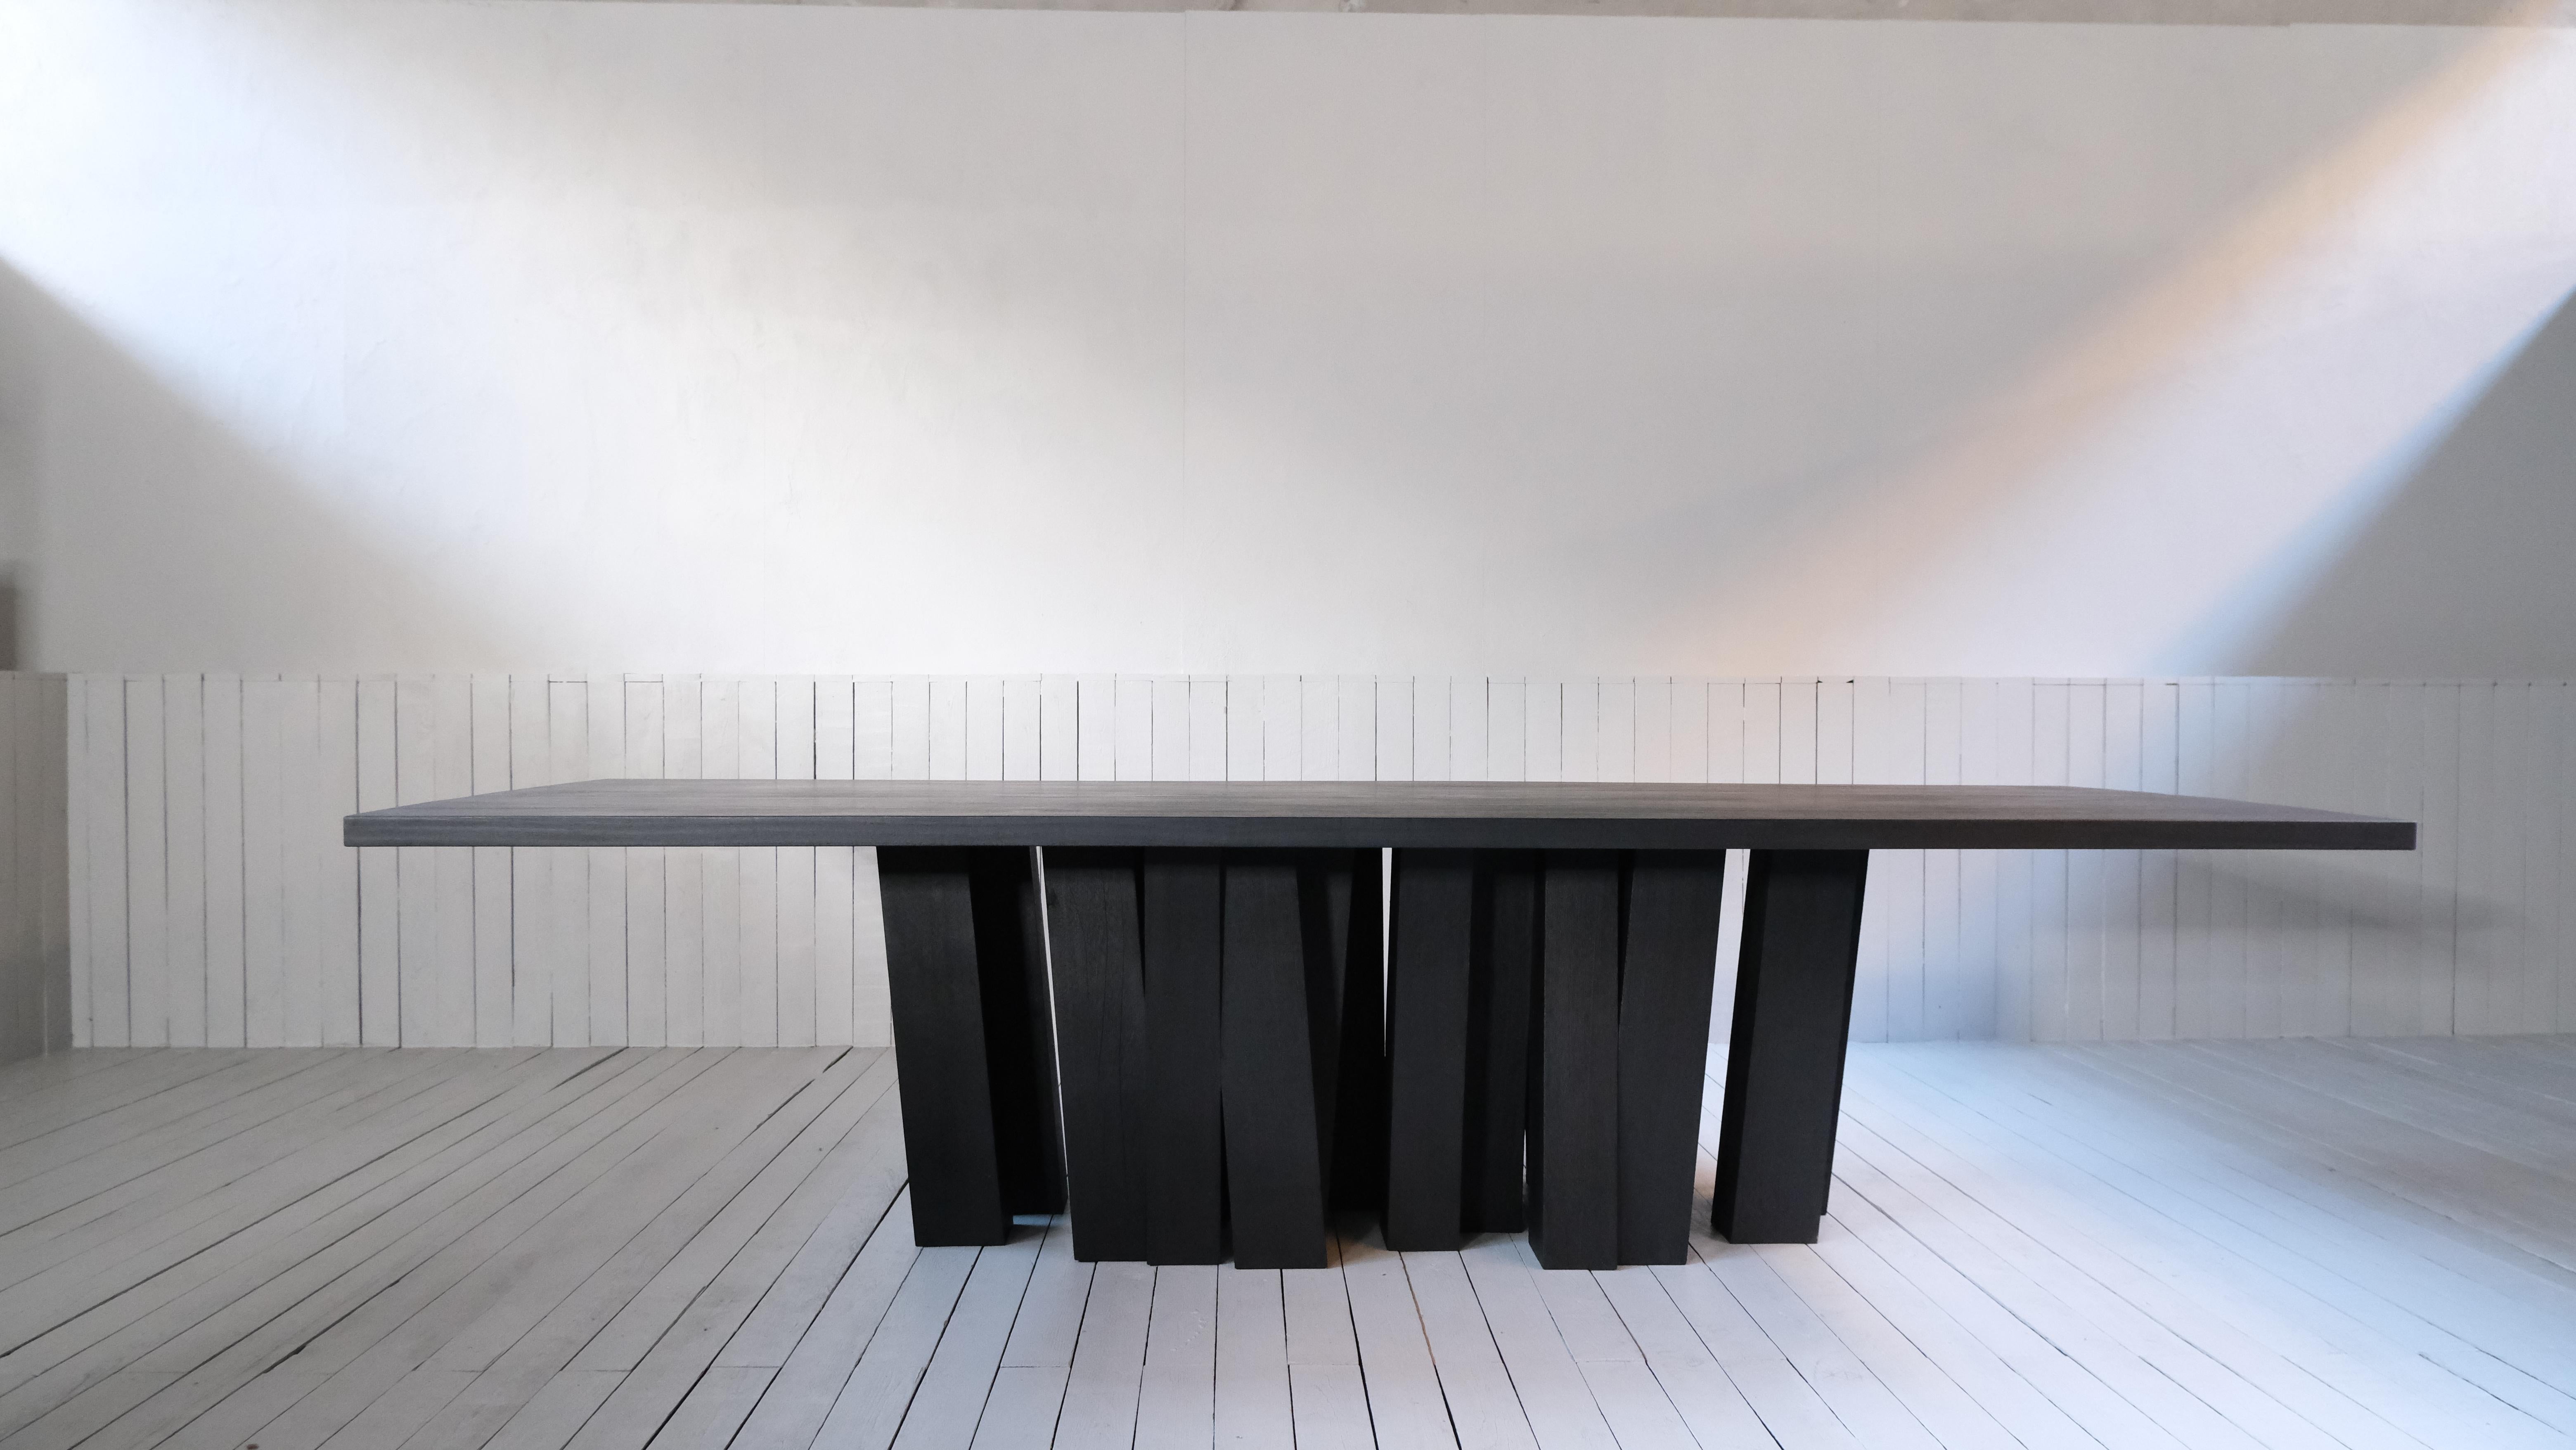 Zoumey Large Base Table by Arno Declercq
Dimensions: W 300 x L 110 x H 75 cm 
Materials: A forest of table legs made out of 25 solid pieces of Iroko Wood 
 Table top made out of African walnut, burned and waxed. 

A dining table for 8 - 12